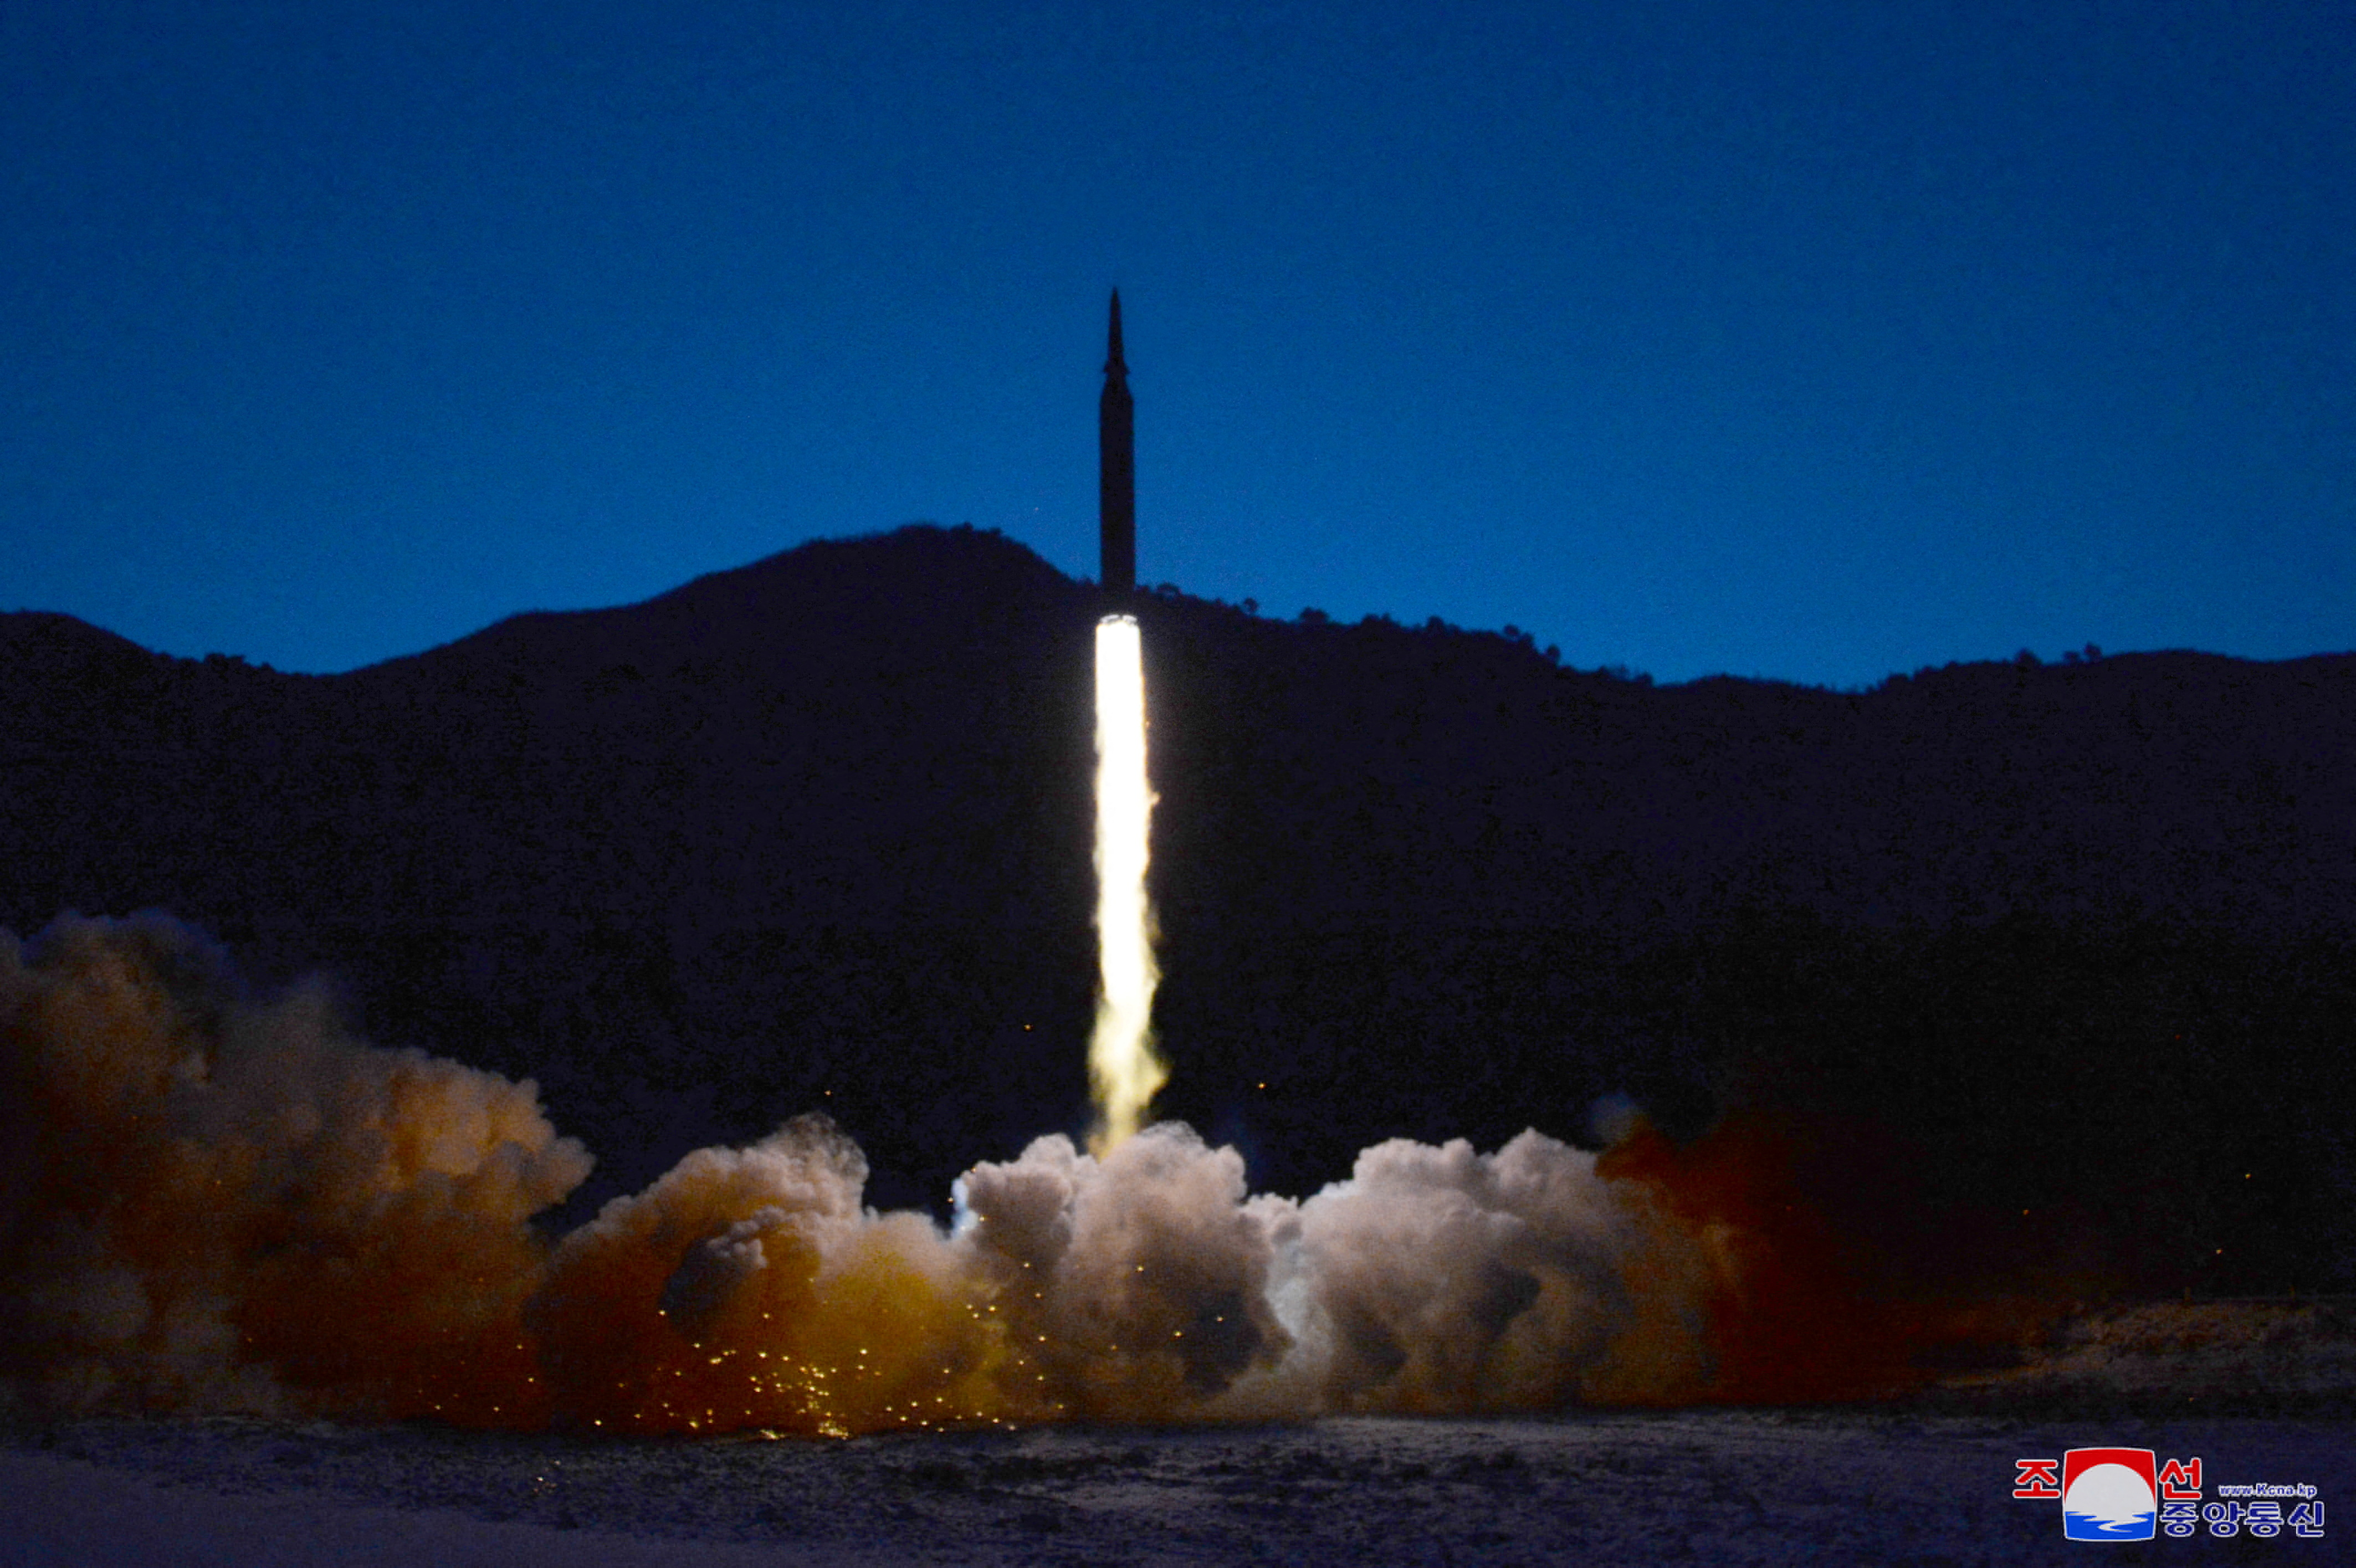 A missile is launched during what state media report is a hypersonic missile test at an undisclosed location in North Korea, January 11, 2022, in this photo released January 12, 2022 by North Korea's Korean Central News Agency (KCNA).  KCNA via REUTERS